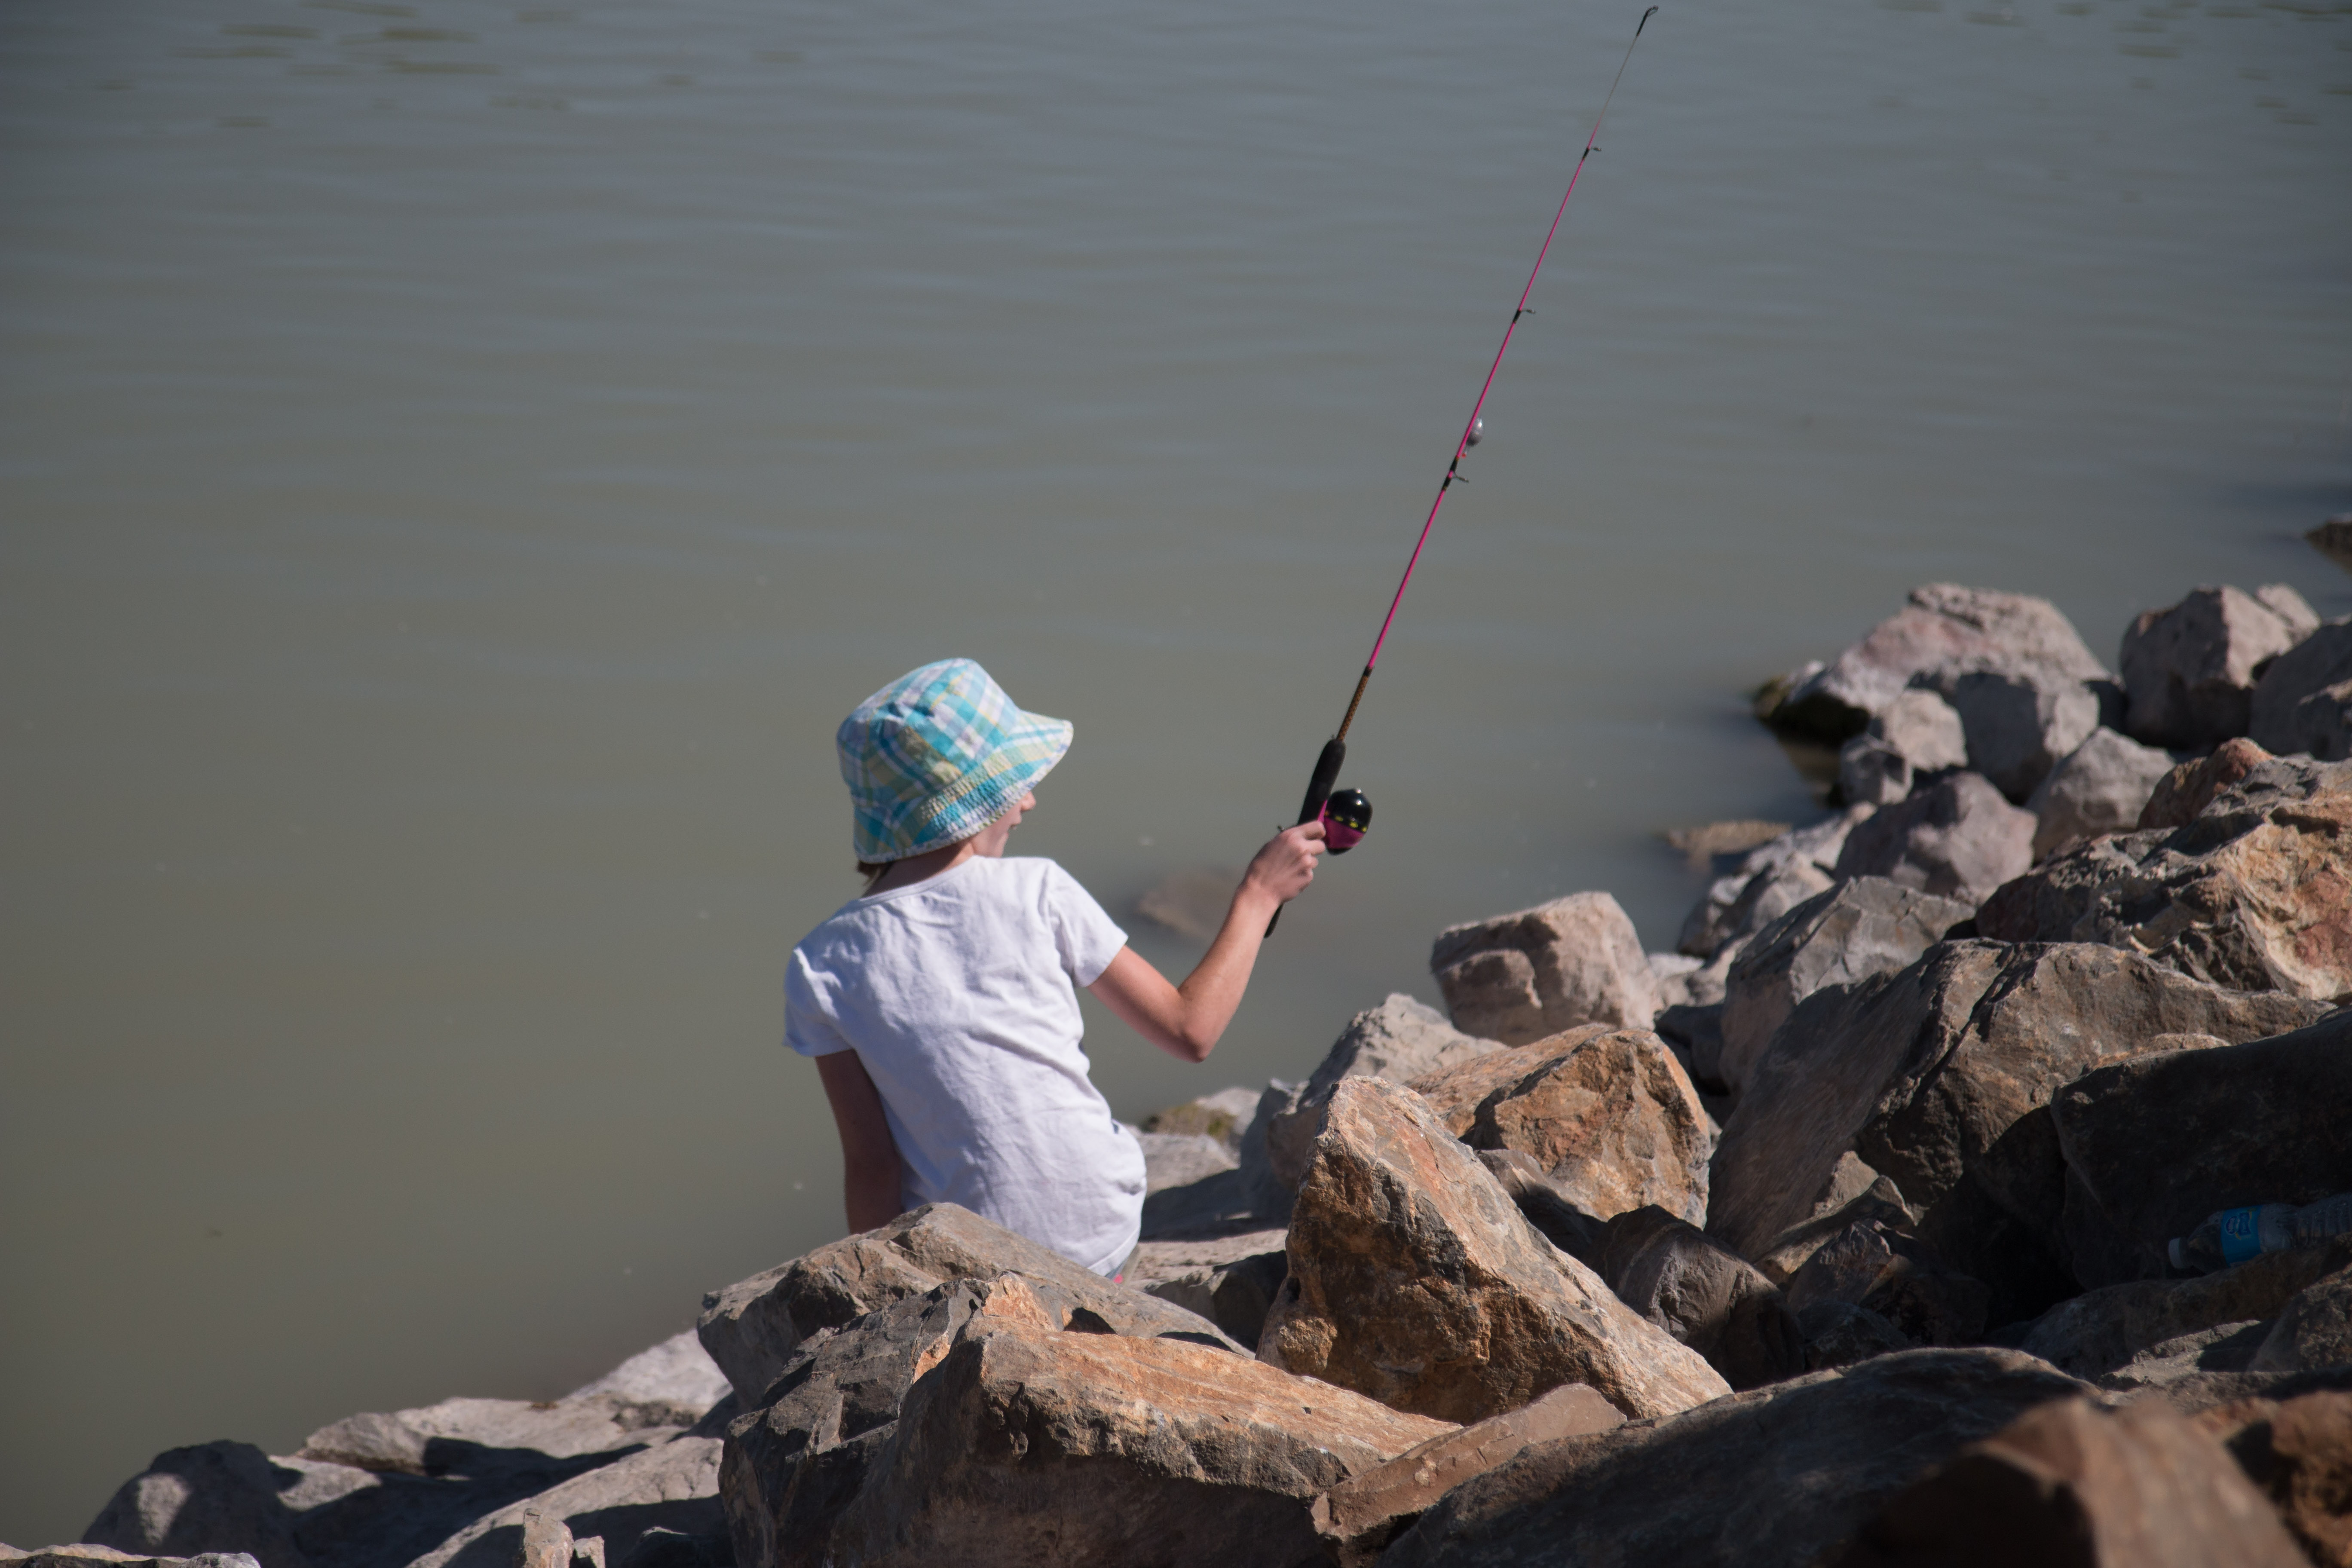 Utah Lake Festival provided information and fun on Free Fishing Day